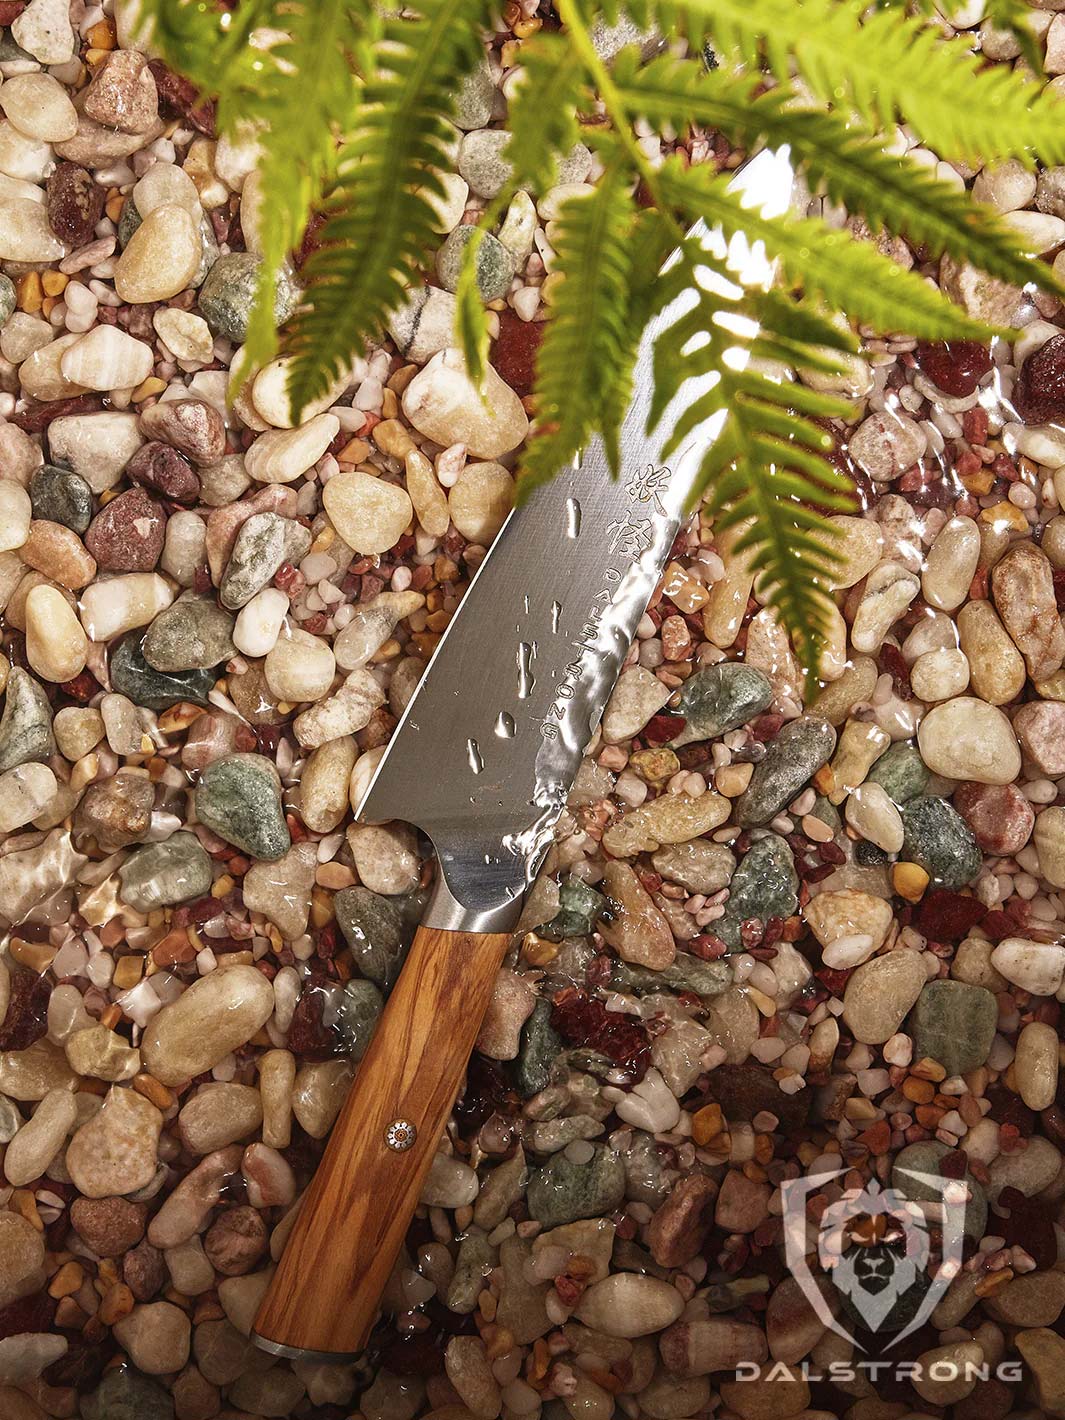 Dalstrong phantom series 8 inch chef knife with olive wood handle on top pebbles.